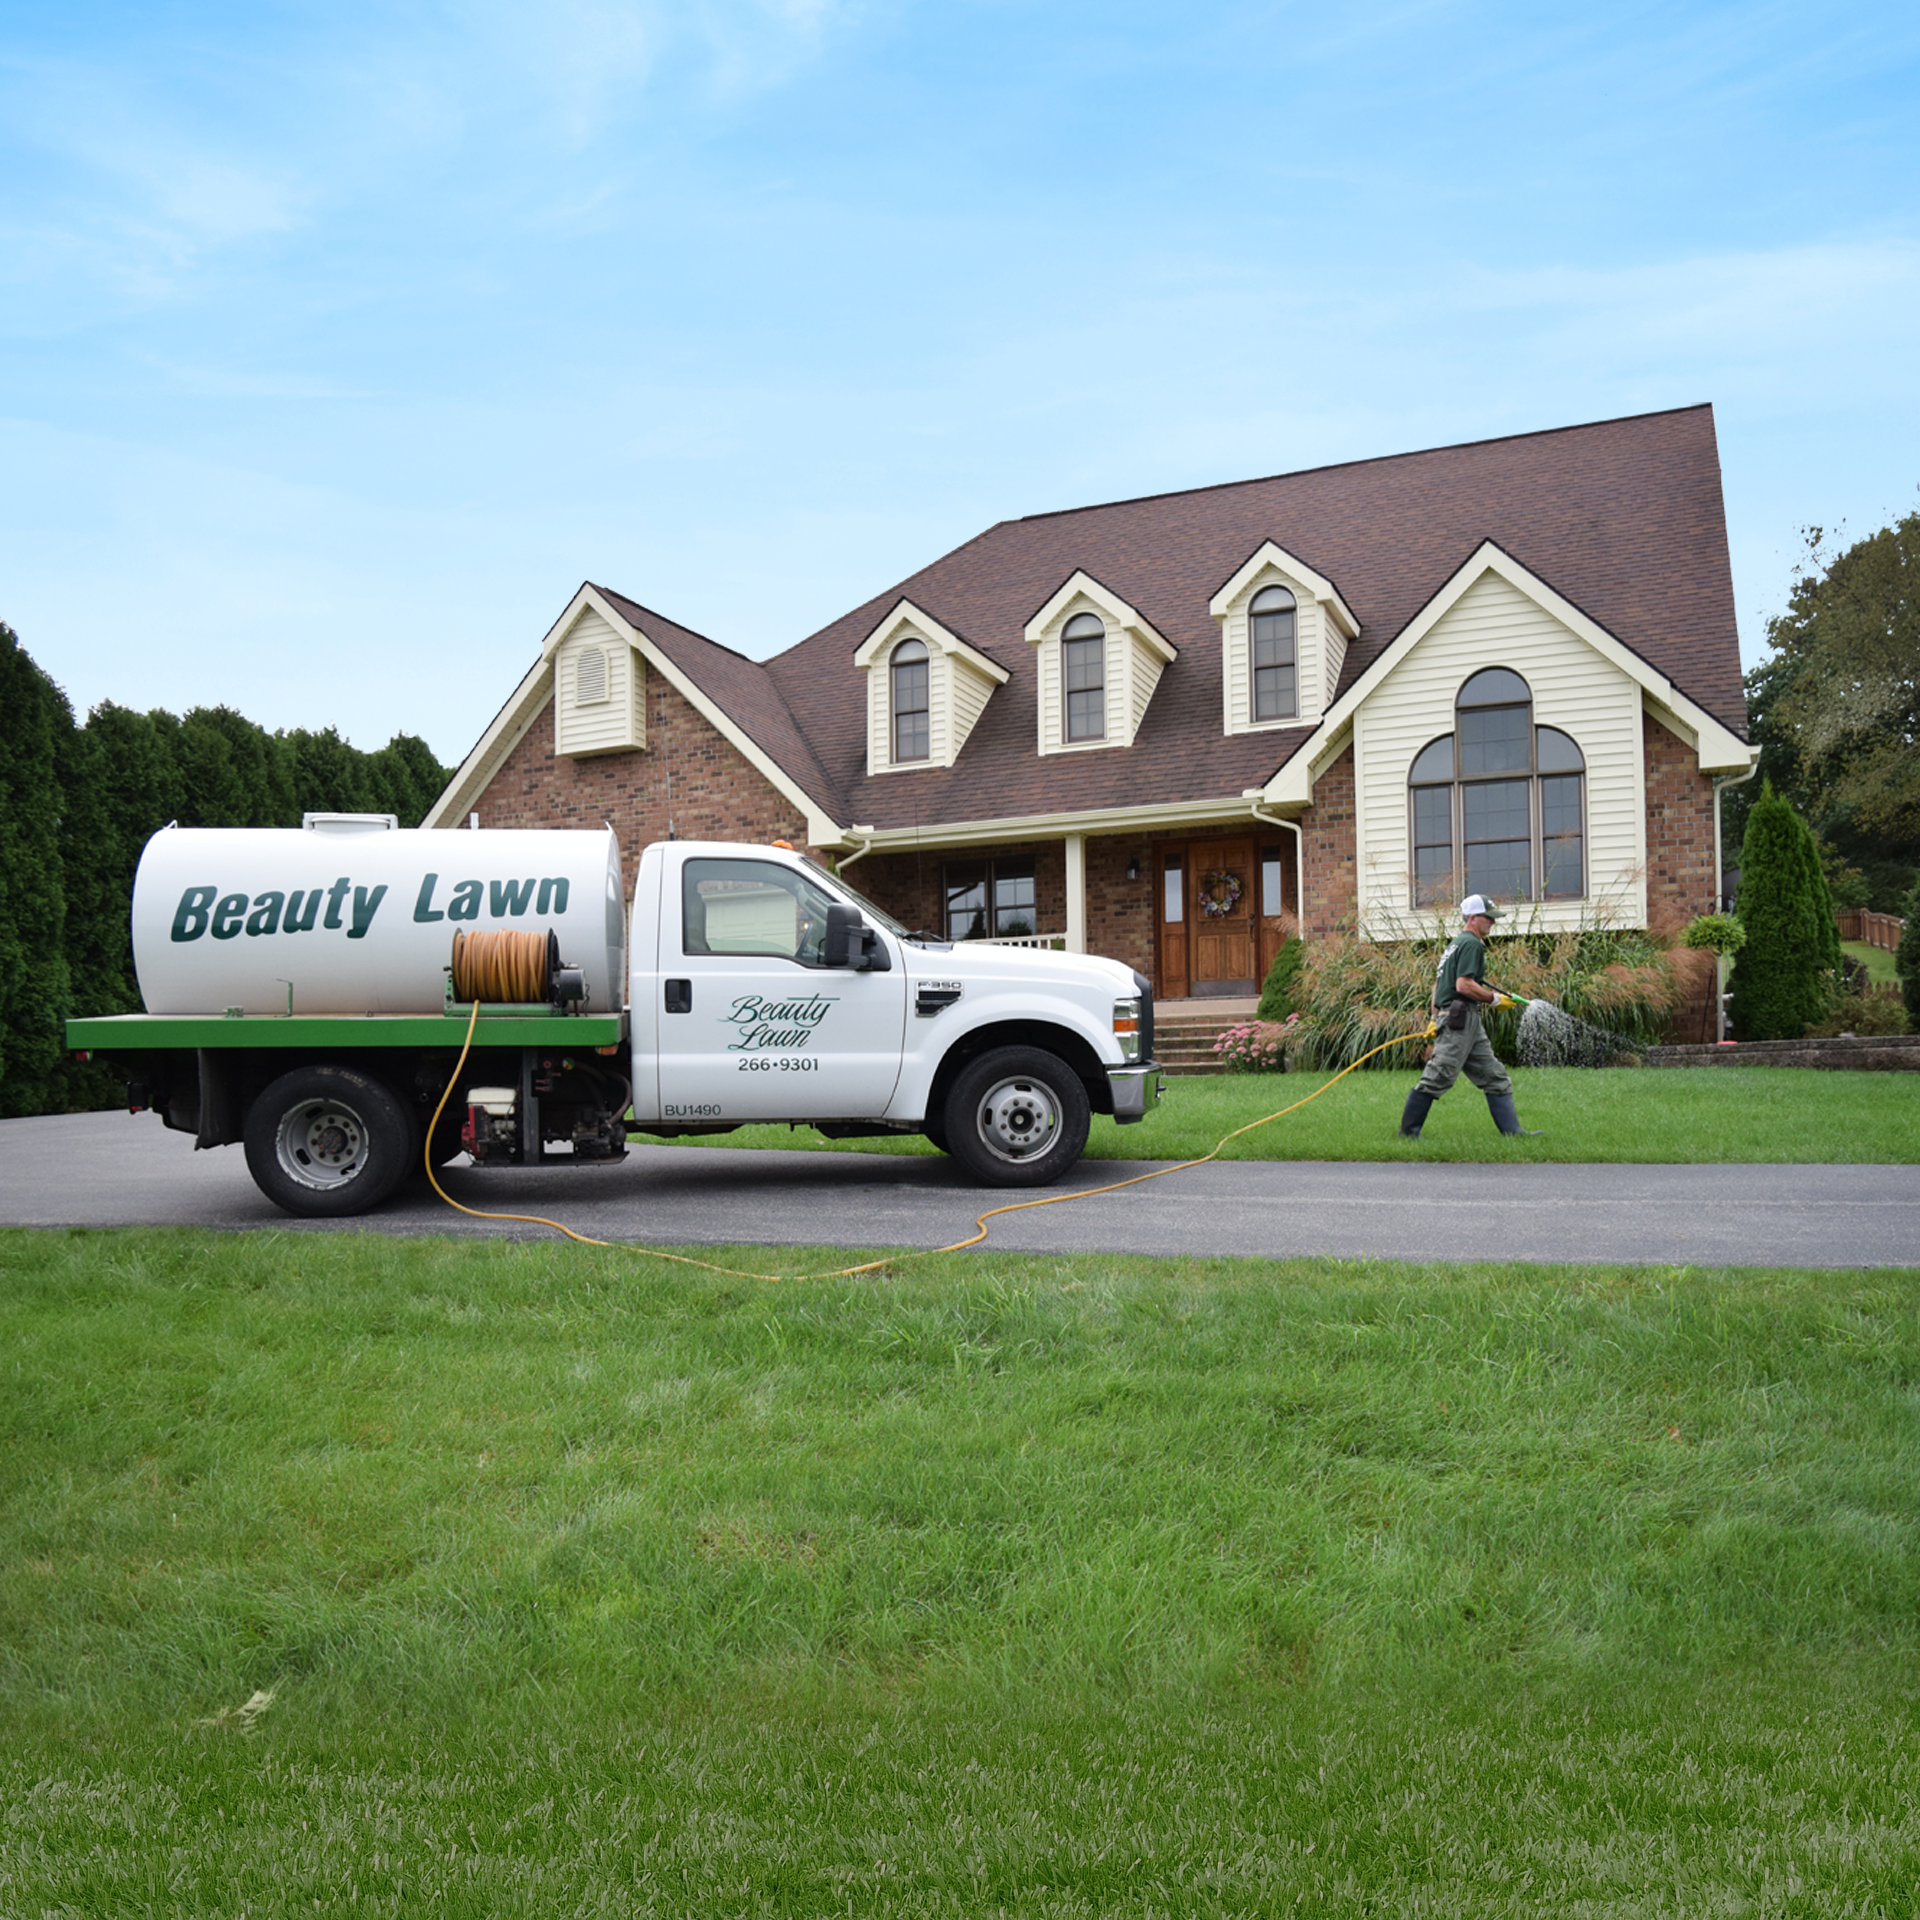 Beauty Lawn truck parked in front of house with technician performing lawn spraying service